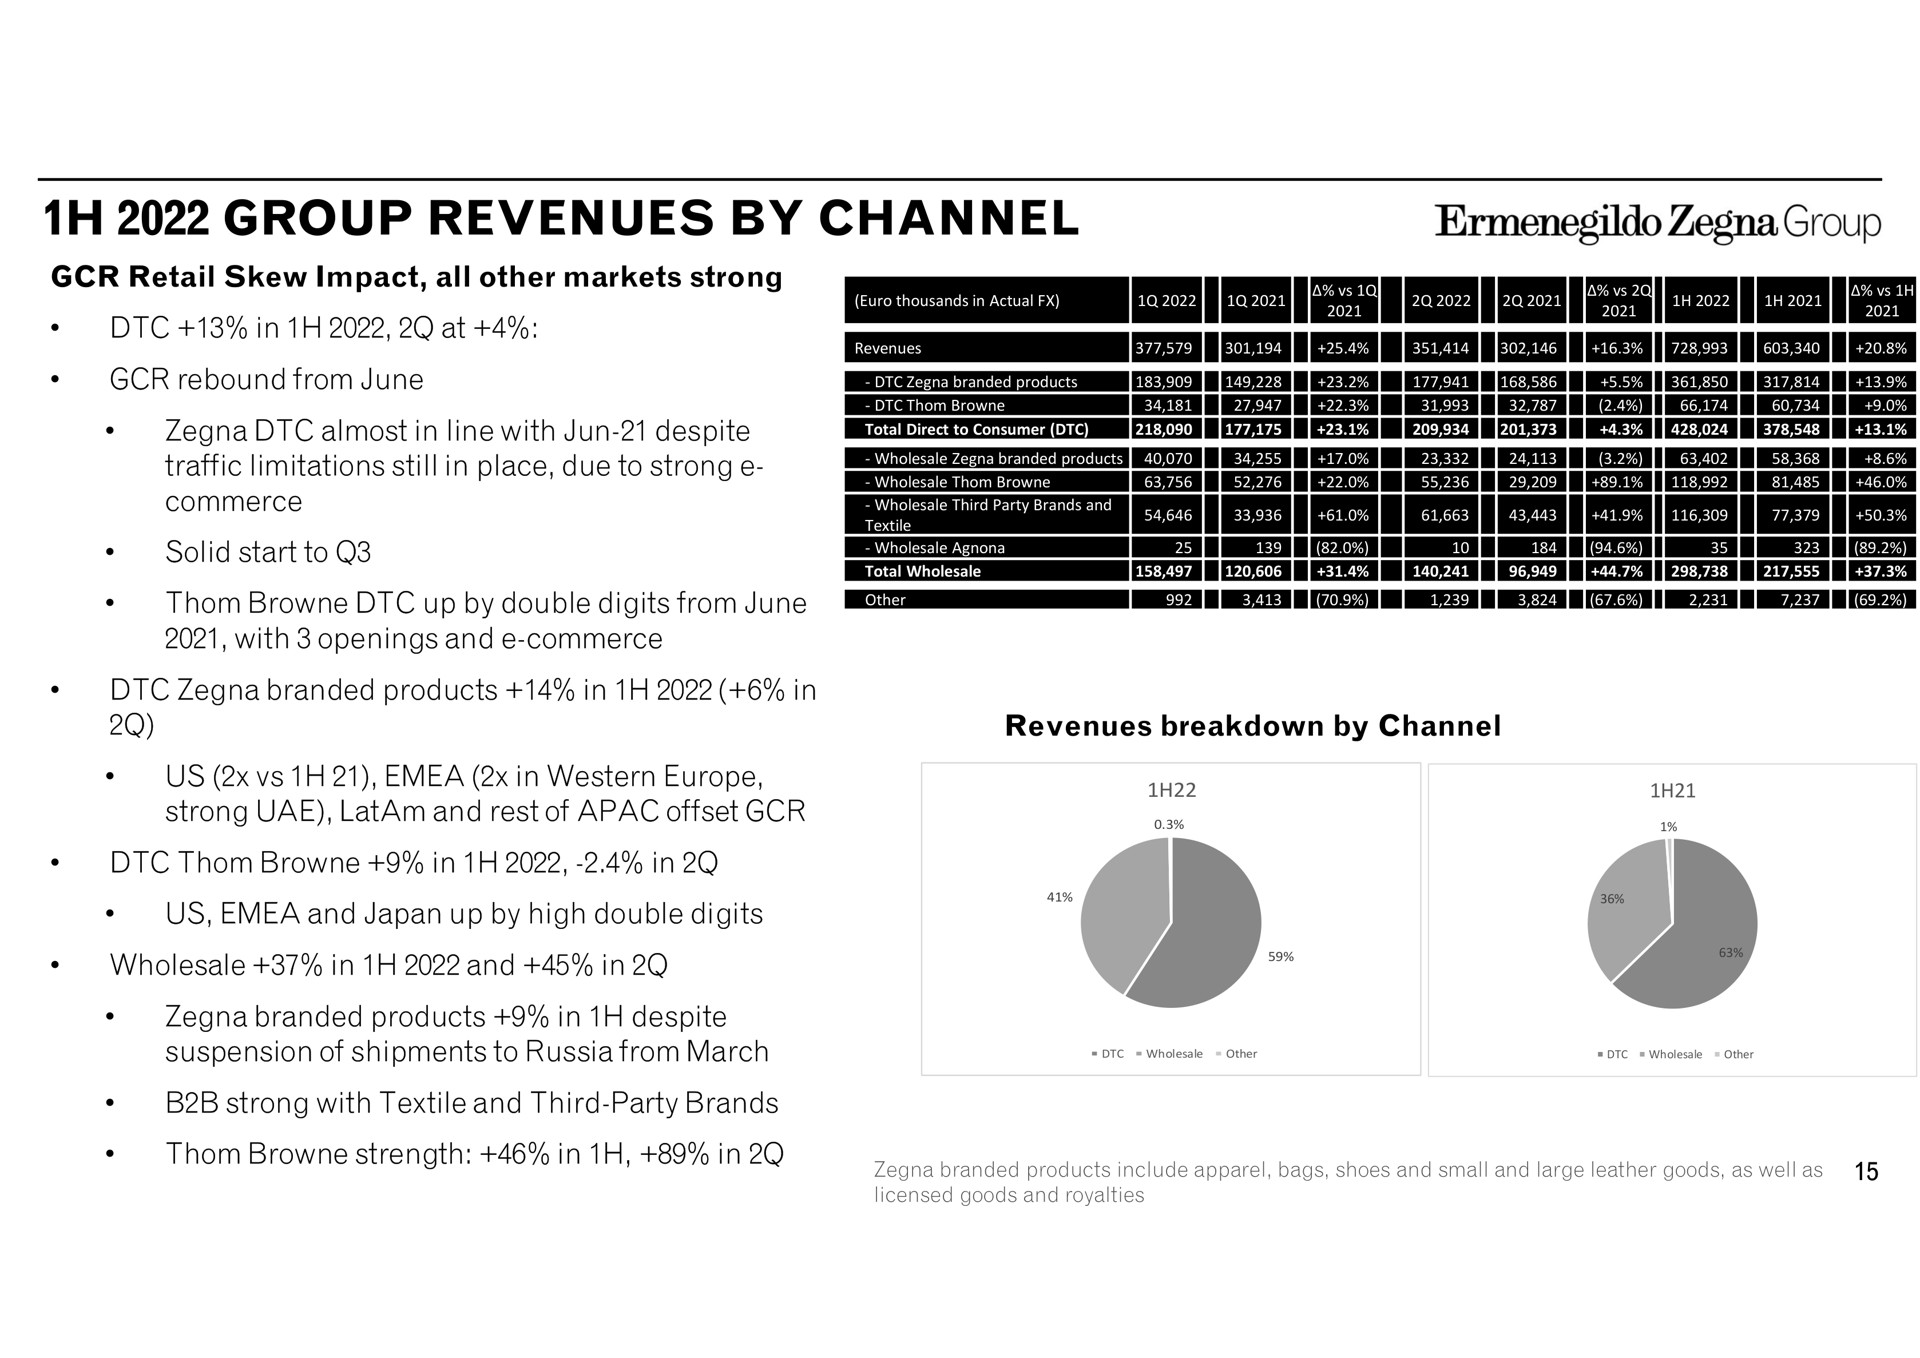 group revenues by channel retail skew impact all other markets strong in at rebound from june almost in line with despite traffic limitations still in place due to strong commerce wholesale third party brands and textile solid start to up double digits from with openings and commerce total wholesale tec i i ley i lee i poe i i i i pol branded products total direct to consumer a a ween branded products in in us in western strong and rest of offset in in wholesale in and in us and japan up high double digits products in despite suspension of shipments to russia from march strong with textile and third party brands strength in in breakdown wholesale other wholesale other branded products include apparel bags shoes and small and large leather goods licensed goods and royalties | Zegna